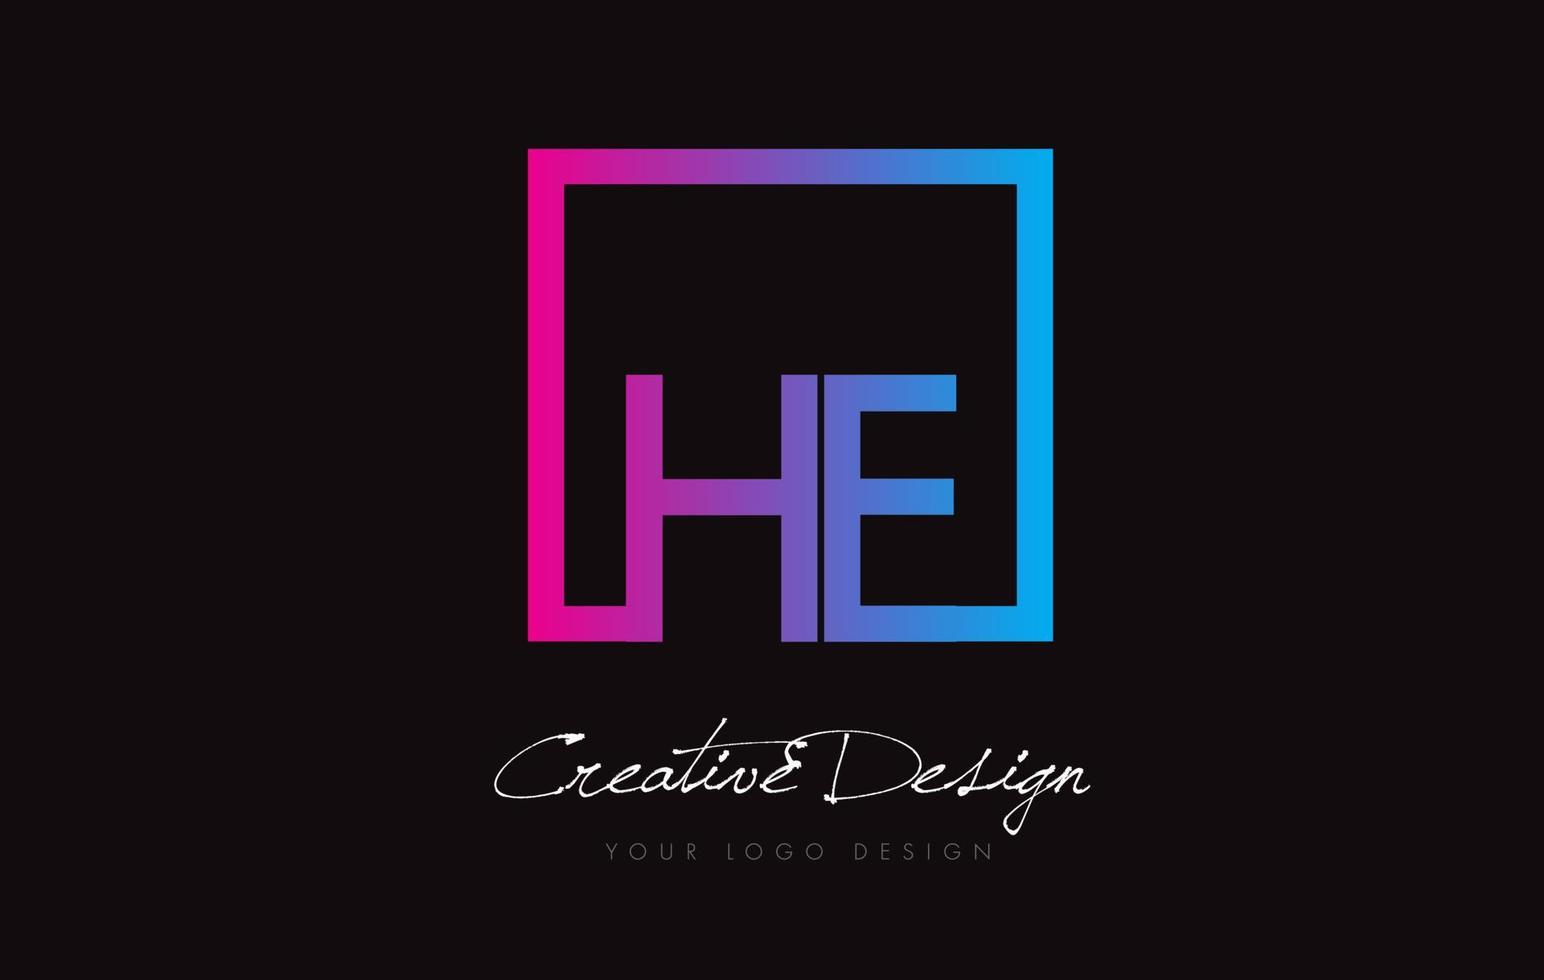 HE Square Frame Letter Logo Design with Purple Blue Colors. vector